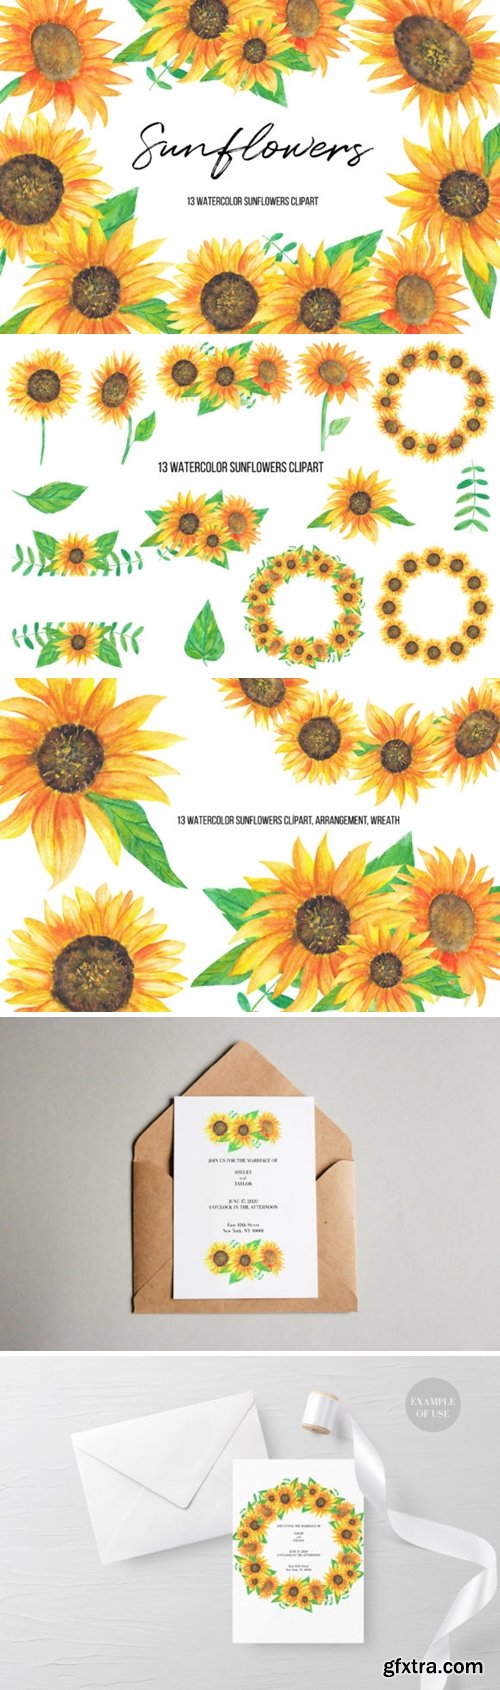 Watercolor Sunflowers Clipart 3671049